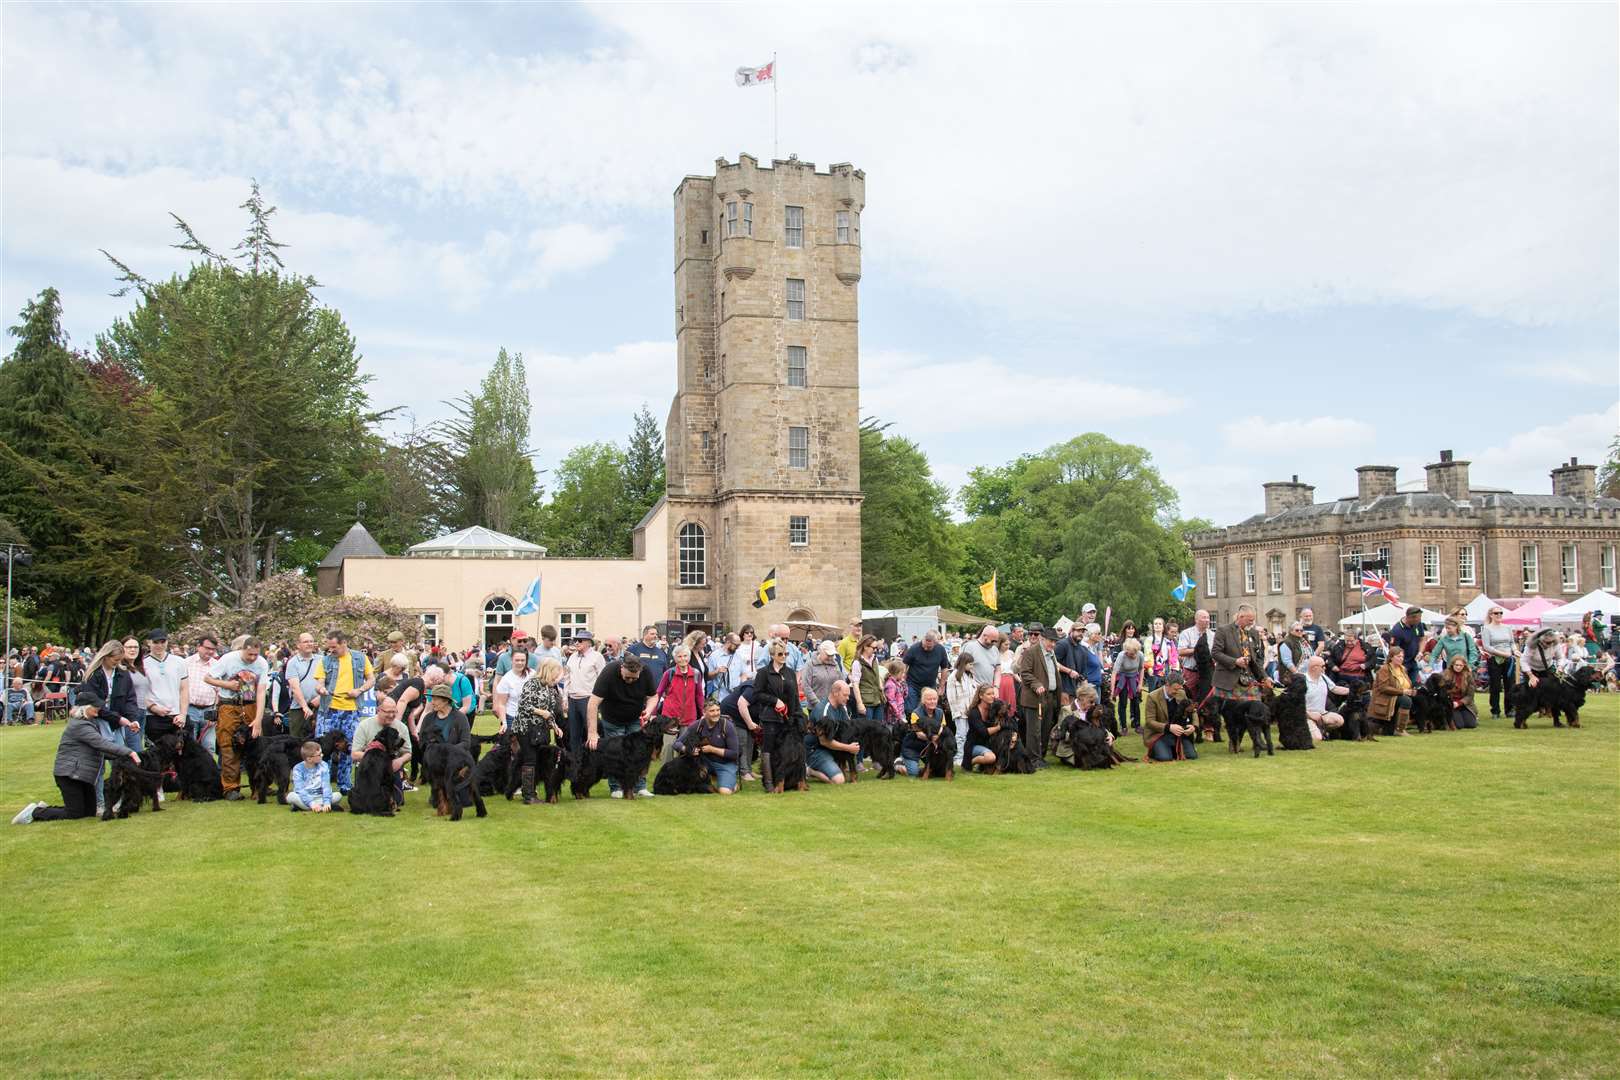 It was a great sight with all the dogs and their owners together. Picture: Daniel Forsyth